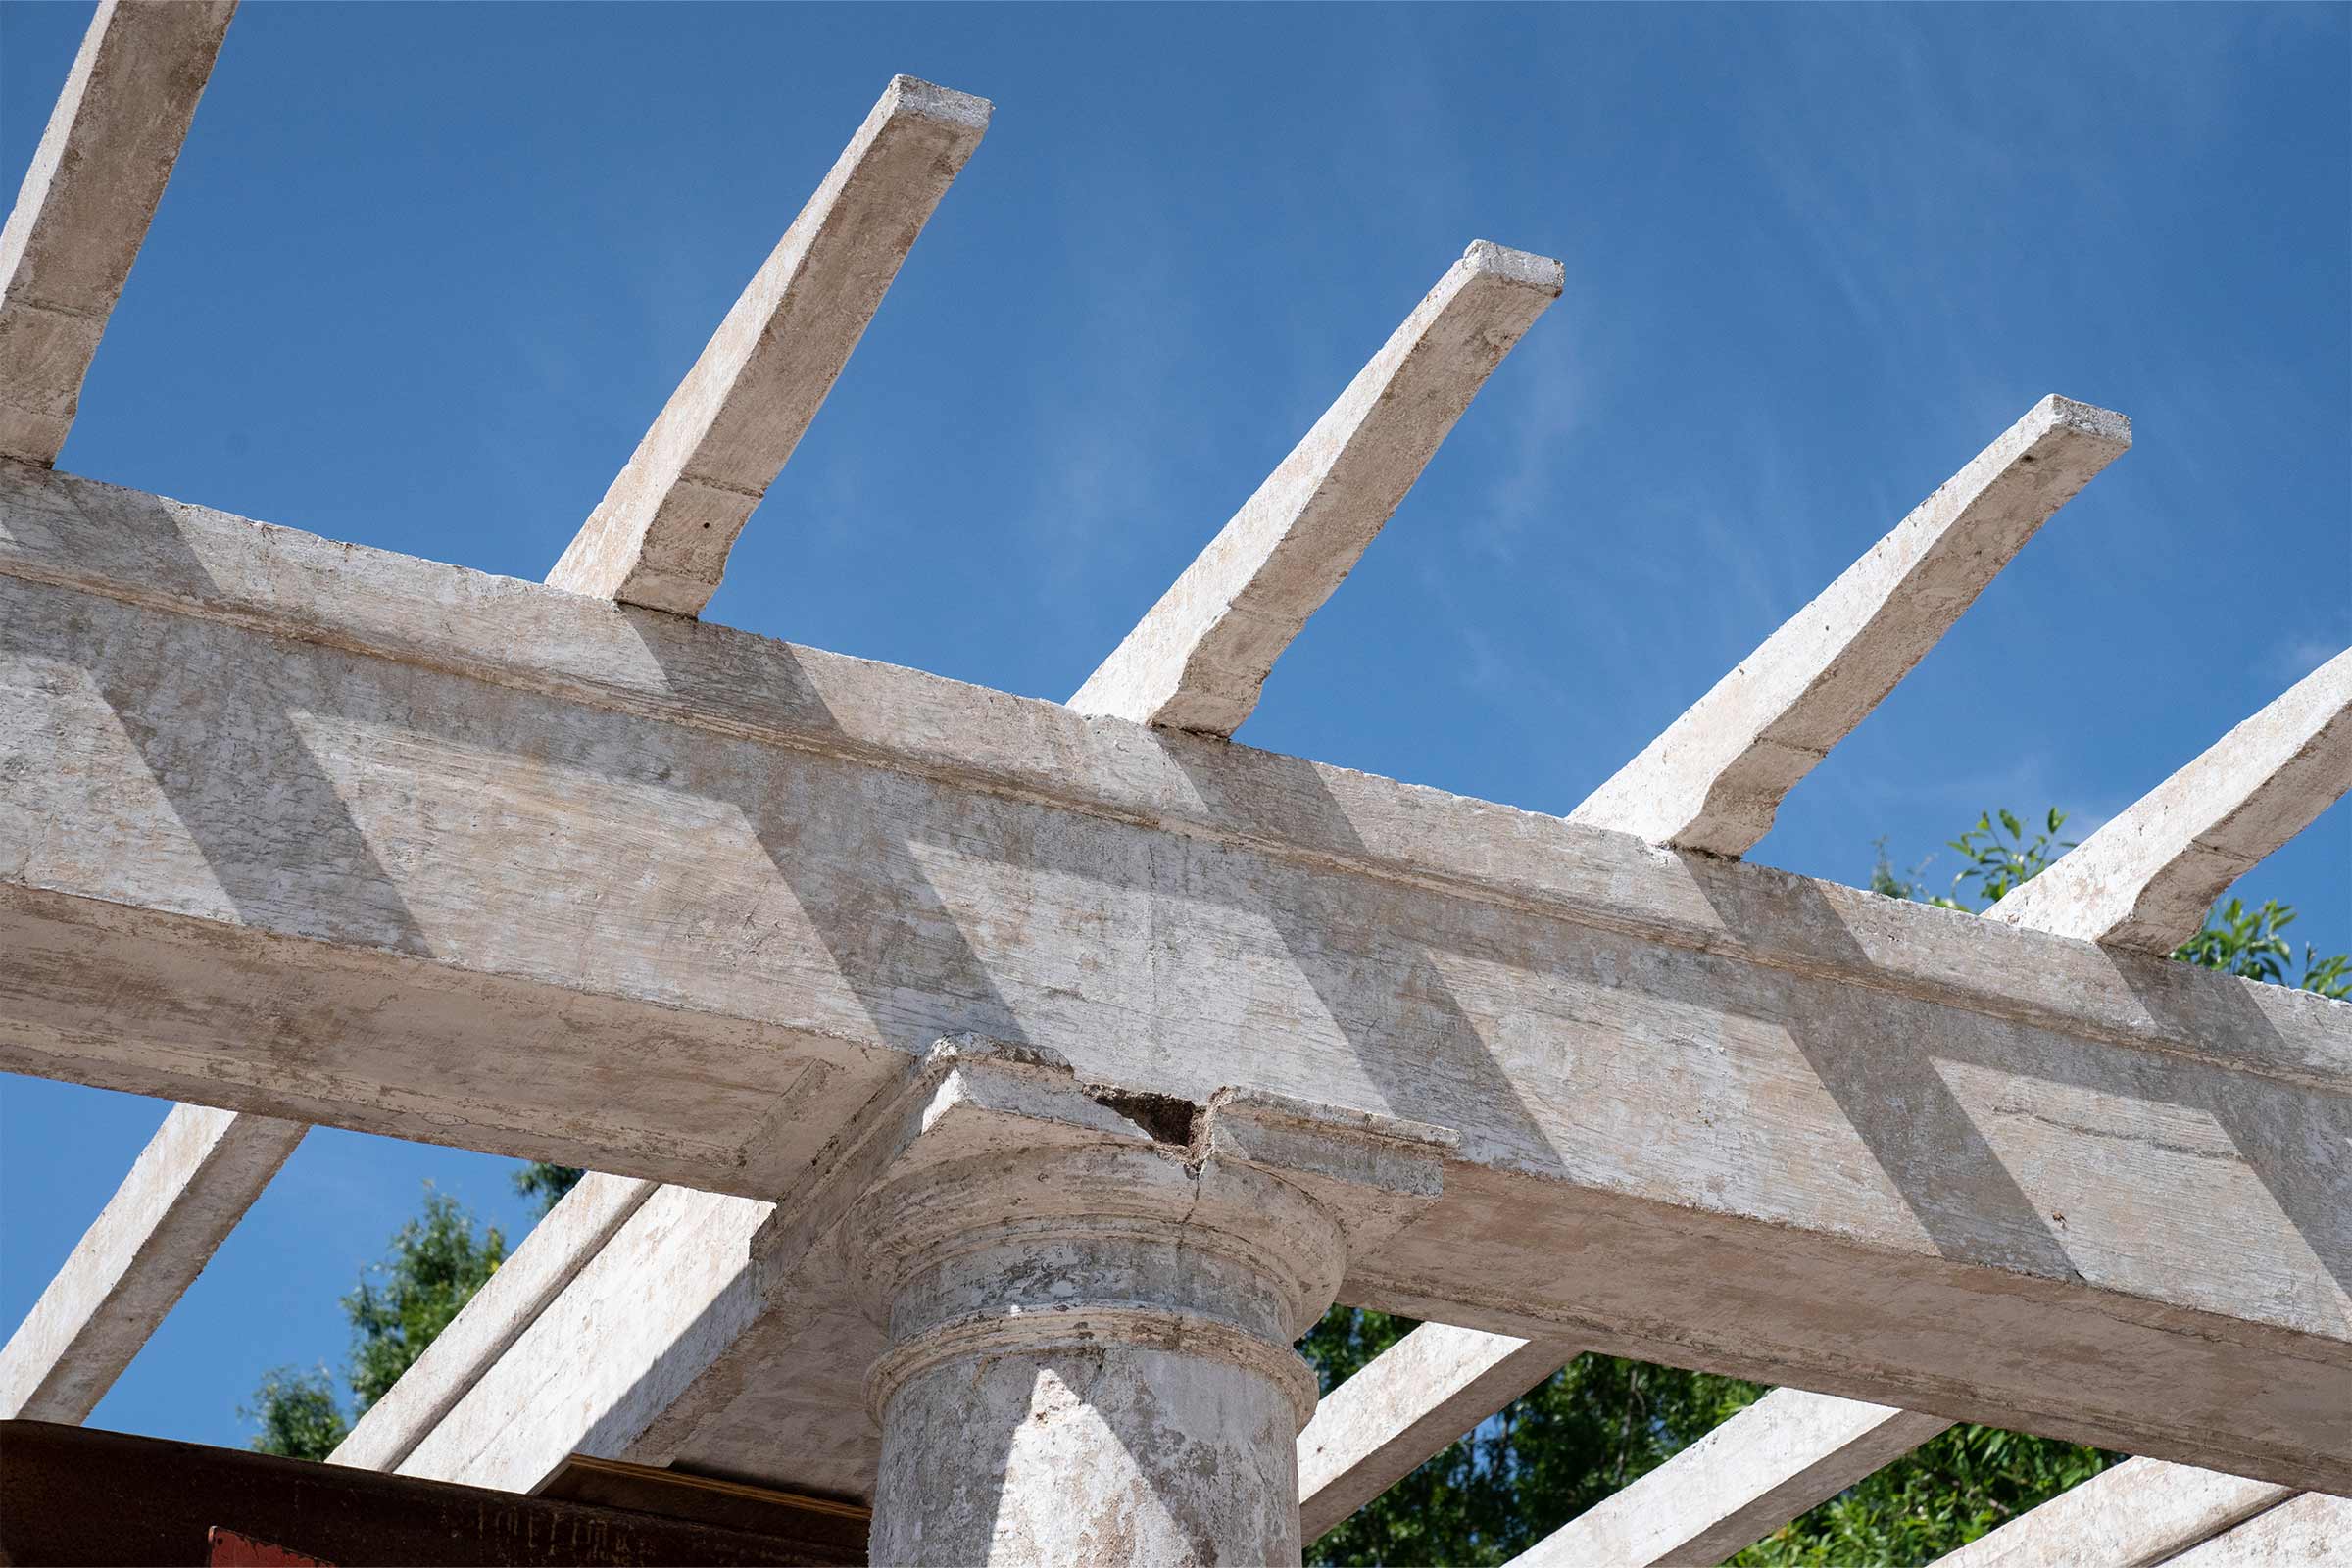 Close up view of details of the pergola